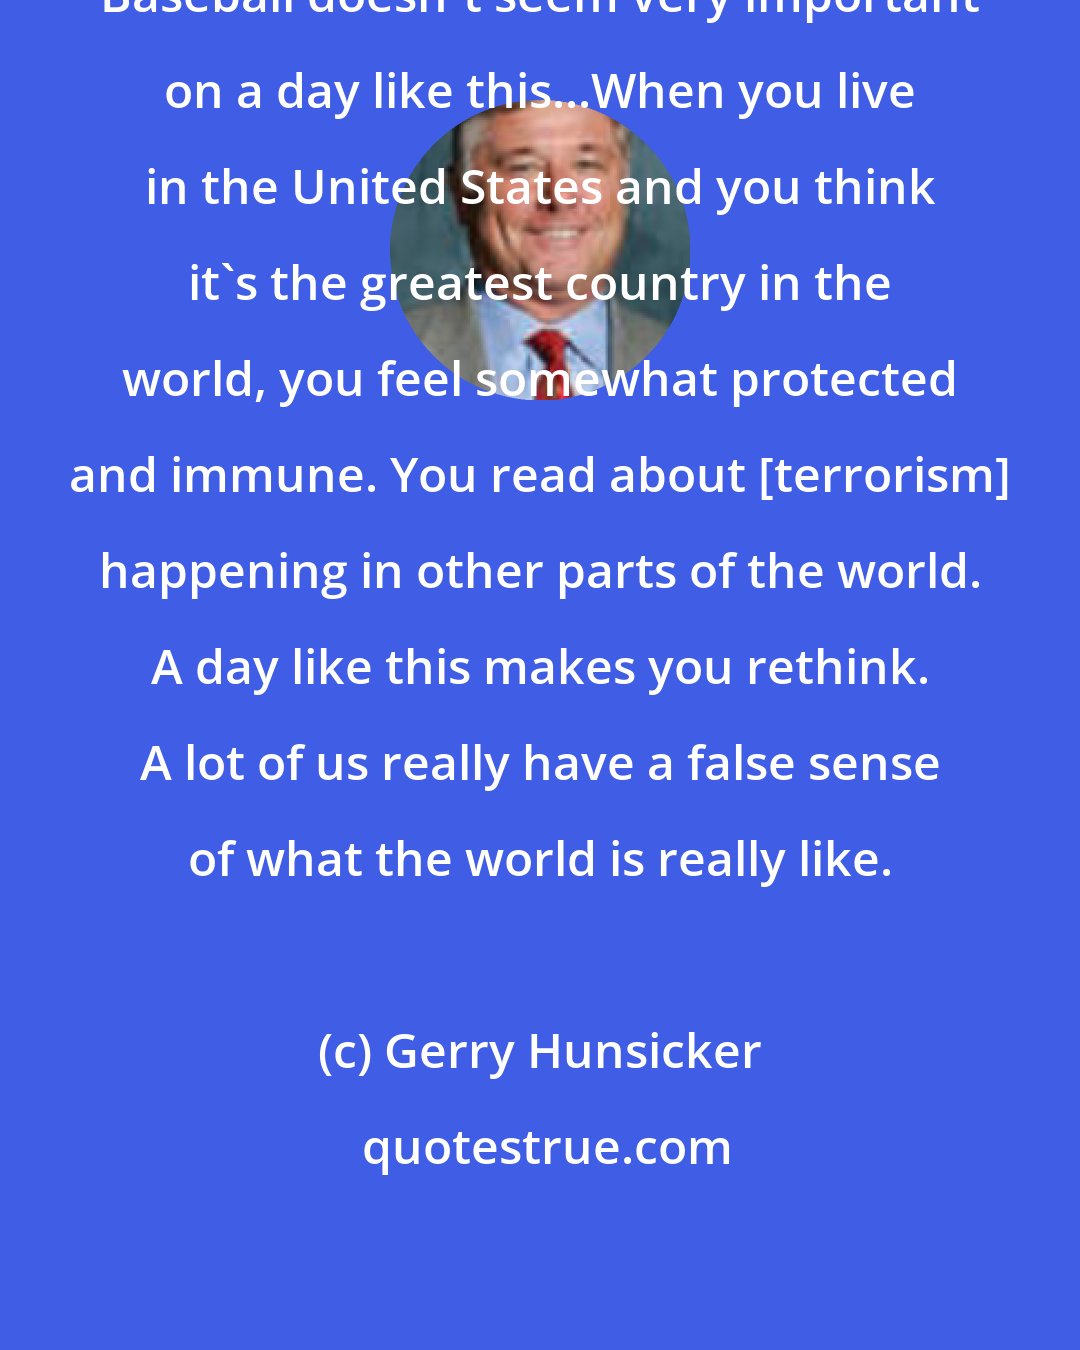 Gerry Hunsicker: Baseball doesn't seem very important on a day like this...When you live in the United States and you think it's the greatest country in the world, you feel somewhat protected and immune. You read about [terrorism] happening in other parts of the world. A day like this makes you rethink. A lot of us really have a false sense of what the world is really like.